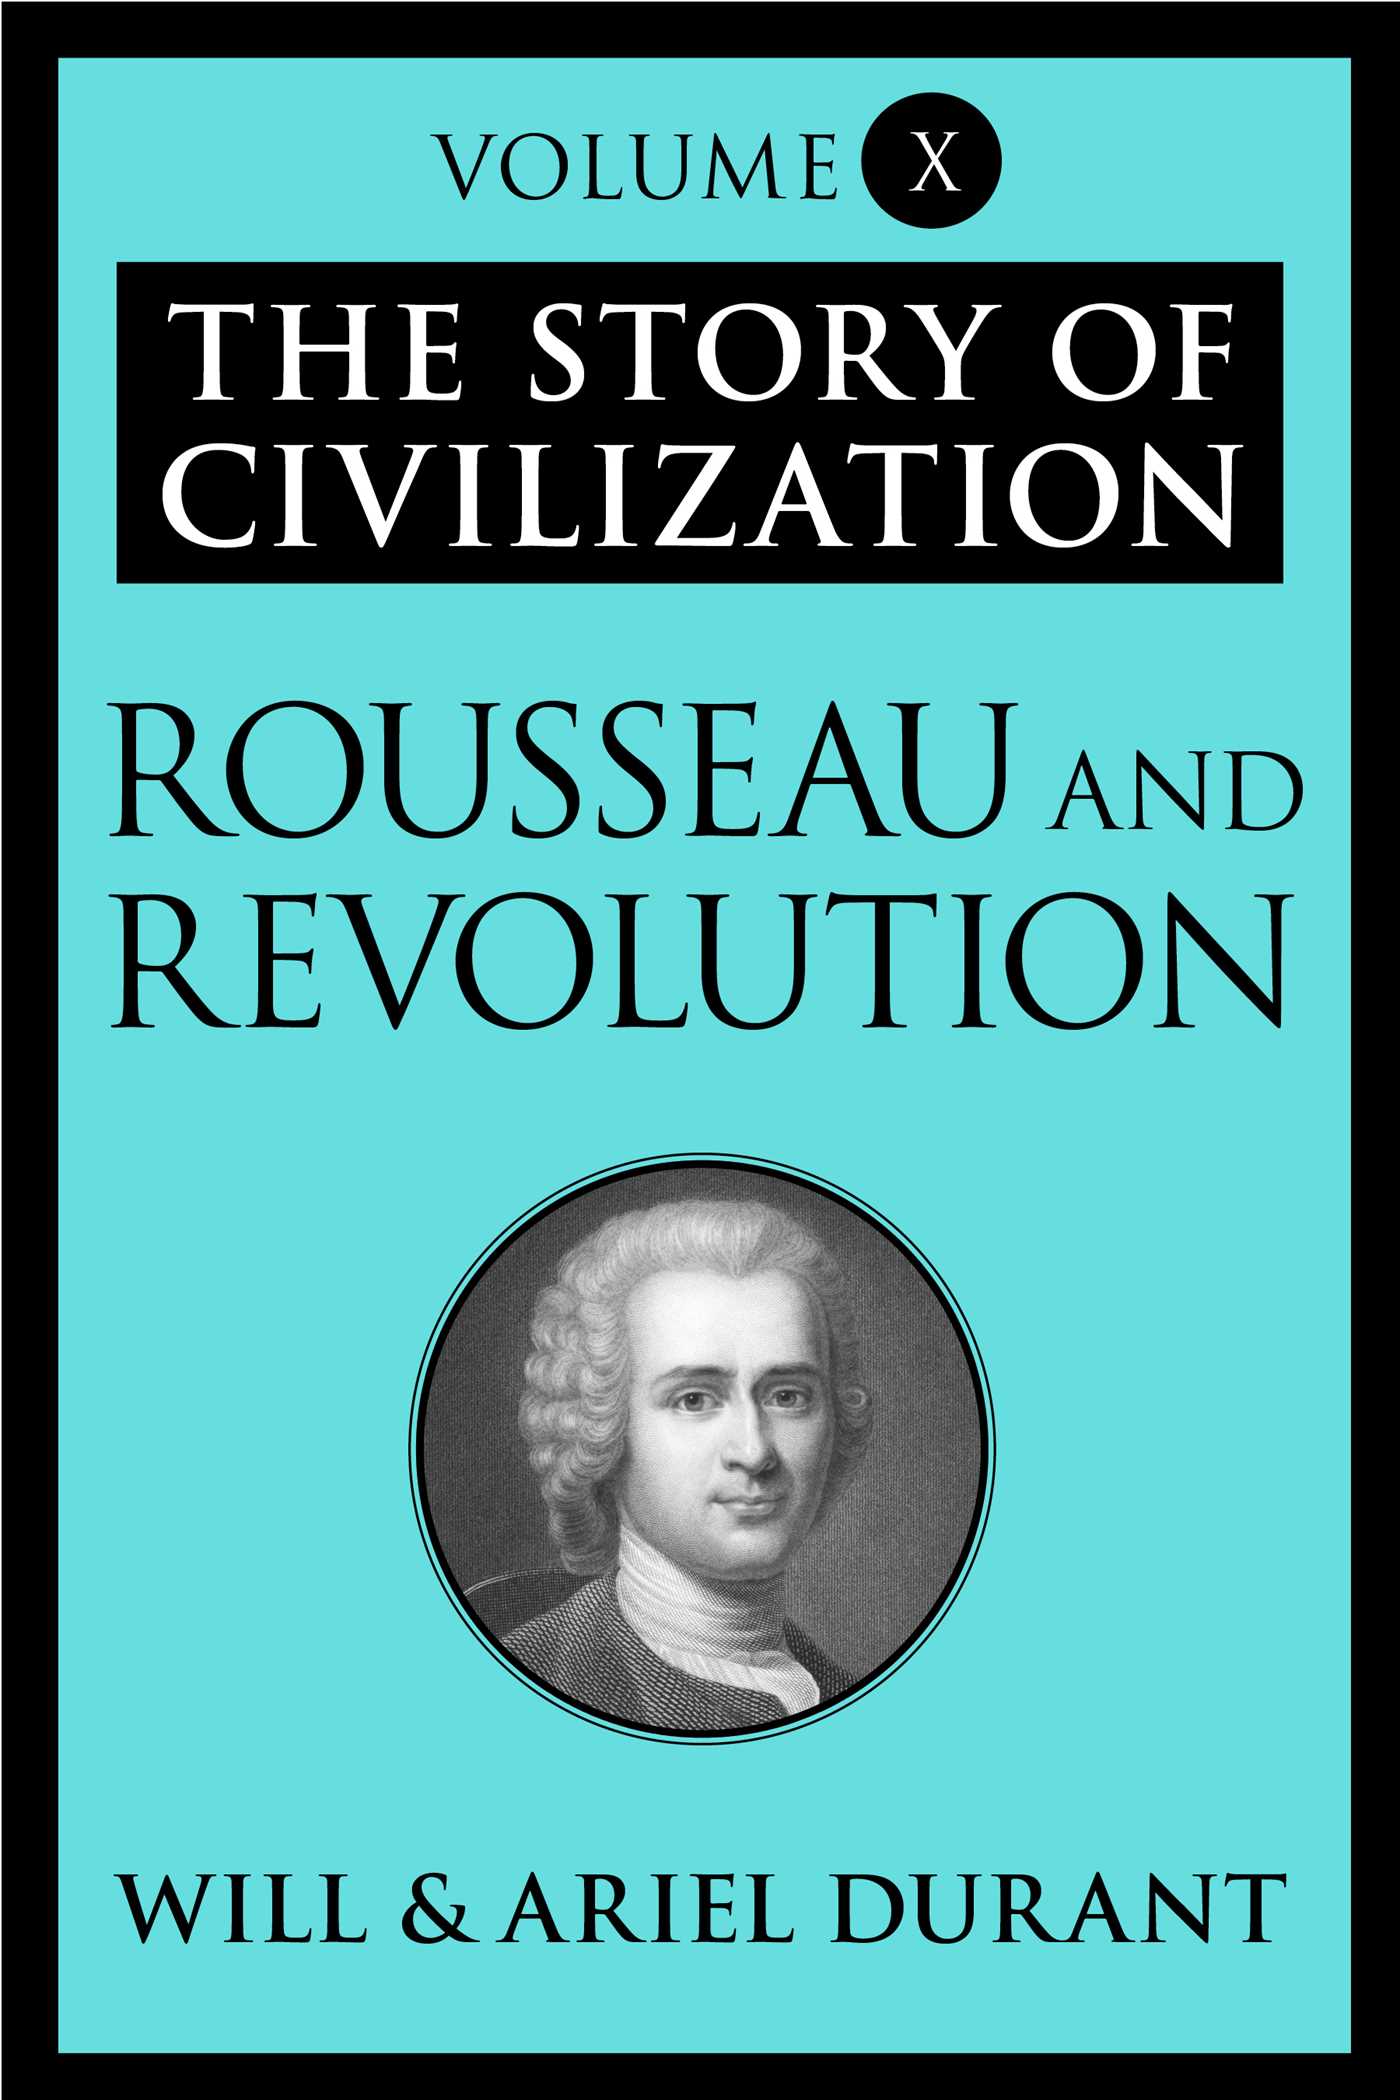 Rousseau and Revolution - 10-14.99